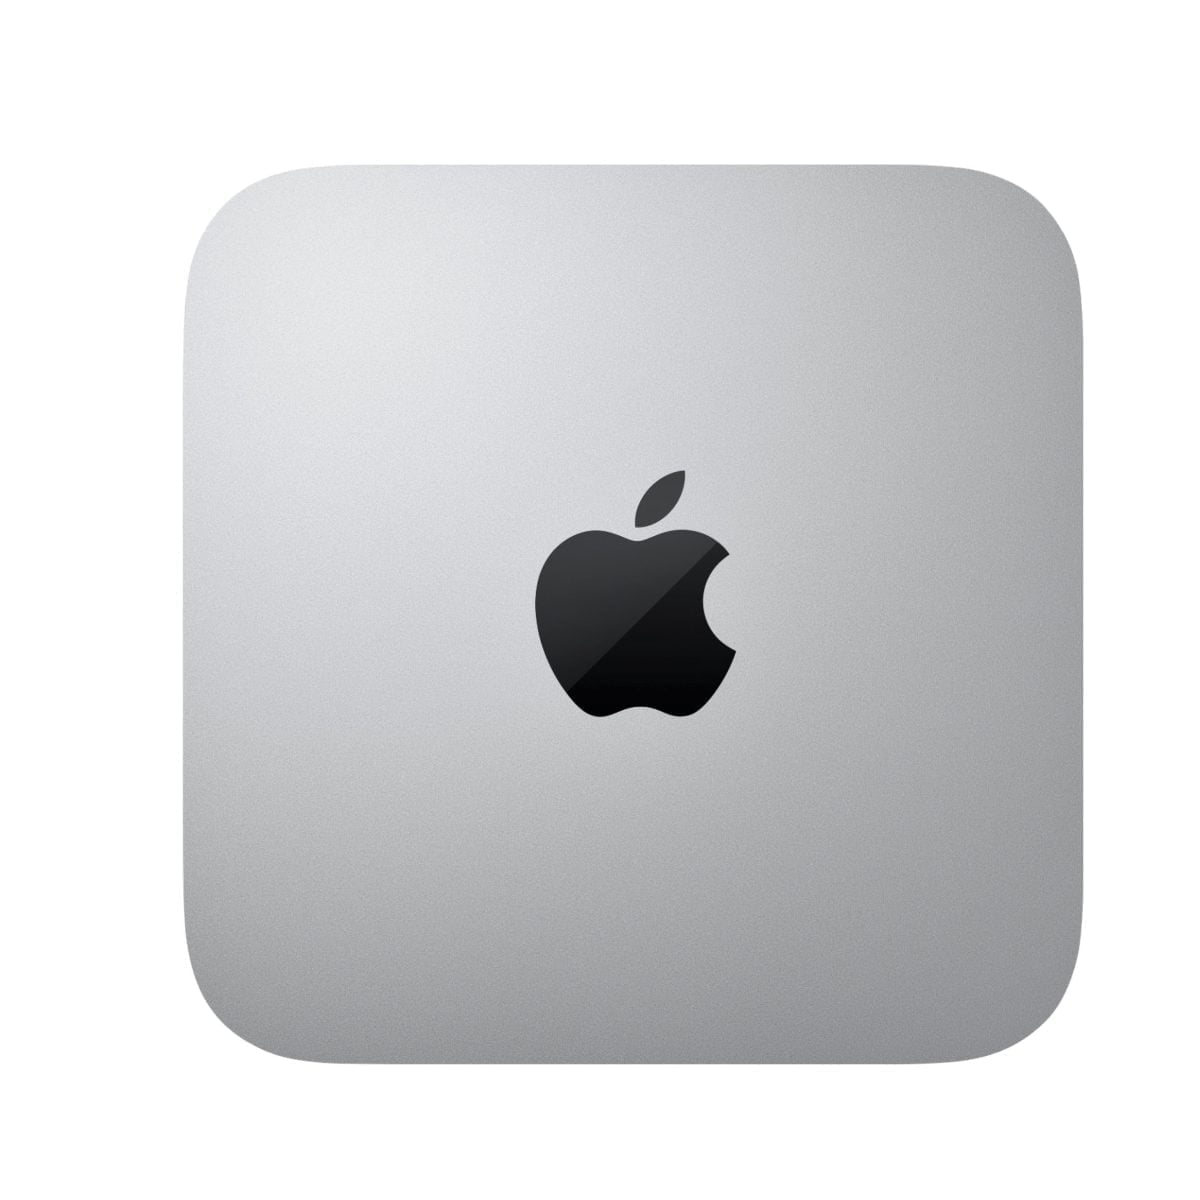 6427497Cv11D Scaled Apple &Lt;H1 Class=&Quot;Heading-5 V-Fw-Regular&Quot;&Gt;Mac Mini Desktop - Apple M1 Chip - 8Gb Memory - 256Gb Ssd (Latest Model) - Silver&Lt;/H1&Gt; Https://Www.youtube.com/Watch?V=3Oq__Scnyna Mac Mini, The Most Versatile, Do-It-All Mac Desktop, To A Whole New Level Of Performance. With Up To 3X Faster Cpu Performance, Up To 6X Faster Graphics, A Powerful Neural Engine With Up To 15X Faster Machine Learning, And Superfast Unified Memory — All In An Ultracompact Design.so You Can Create, Work, And Play On Mac Mini With Speed And Power Beyond Anything You Ever Imagined. Mac Mini Mac Mini Desktop - Apple M1 Chip - 8Gb Memory - 256Gb Ssd (Latest Model) - Silver Mgnr3